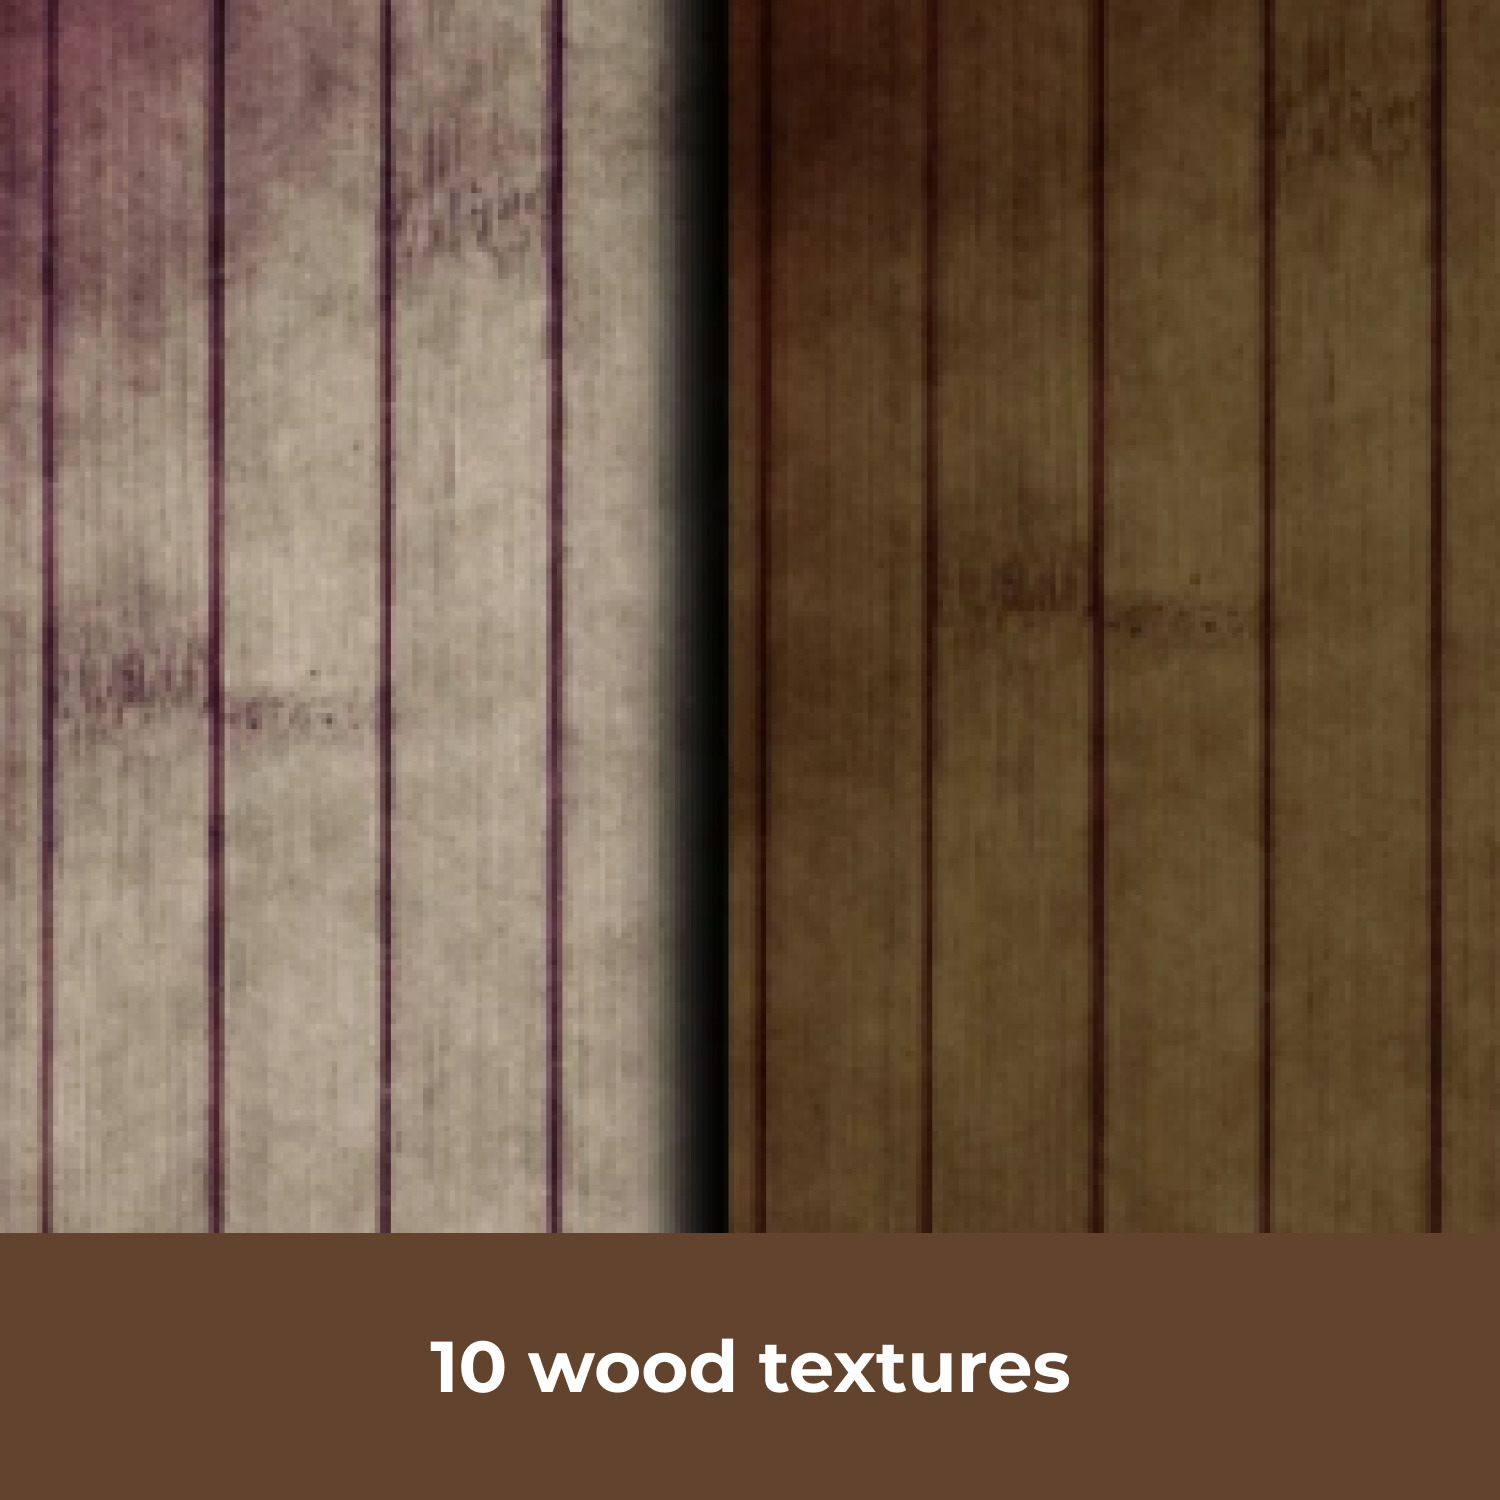 10 wood textures cover.